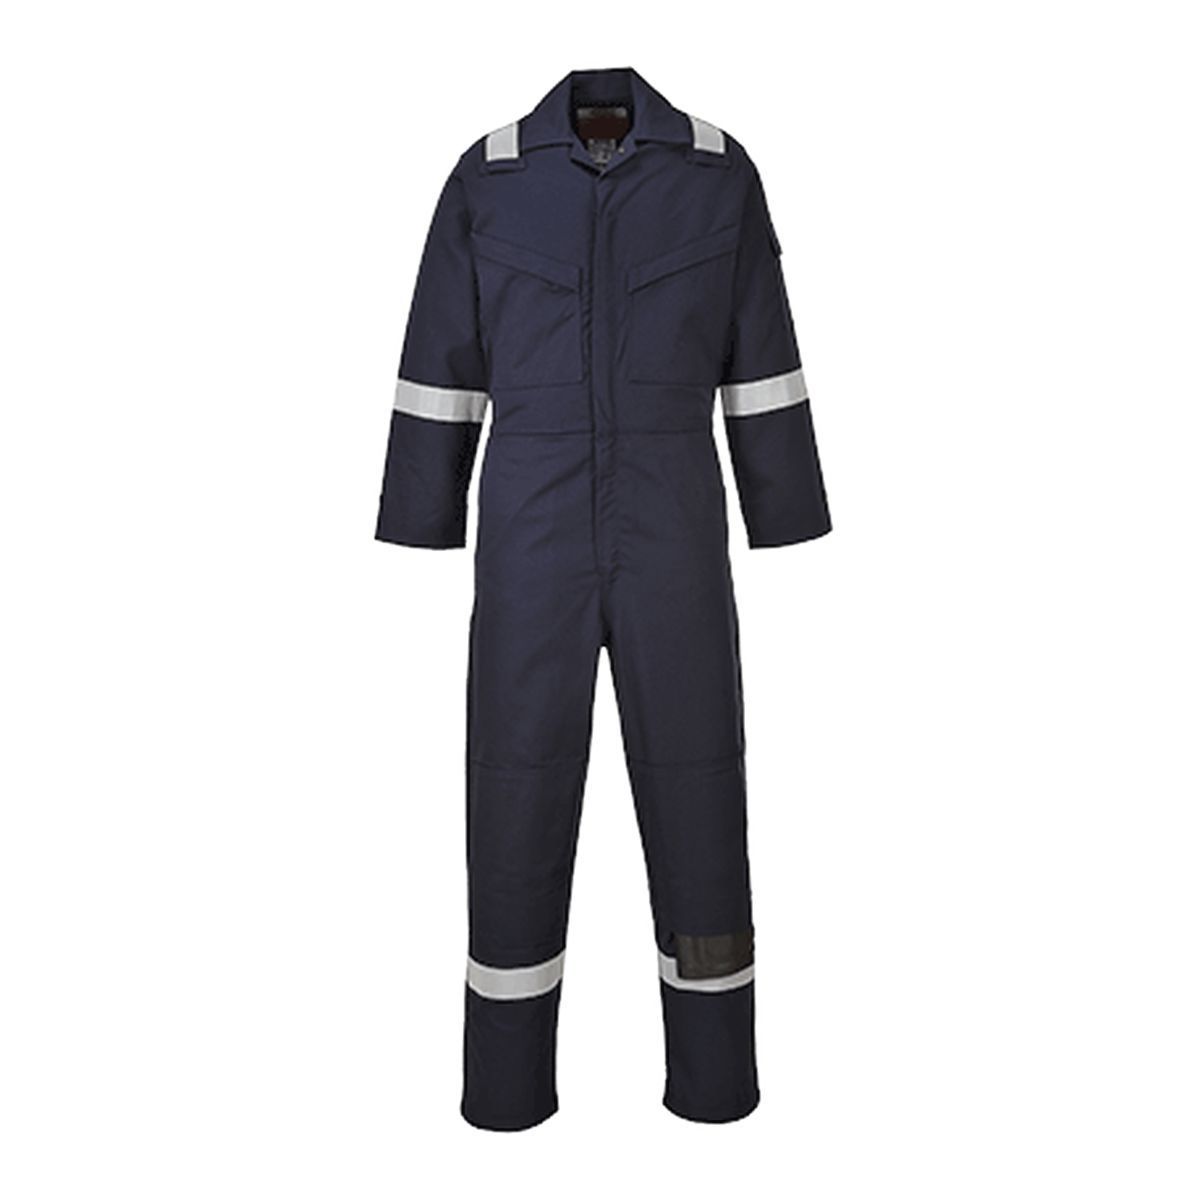 Style AF53 Araflame Gold Coverall-1